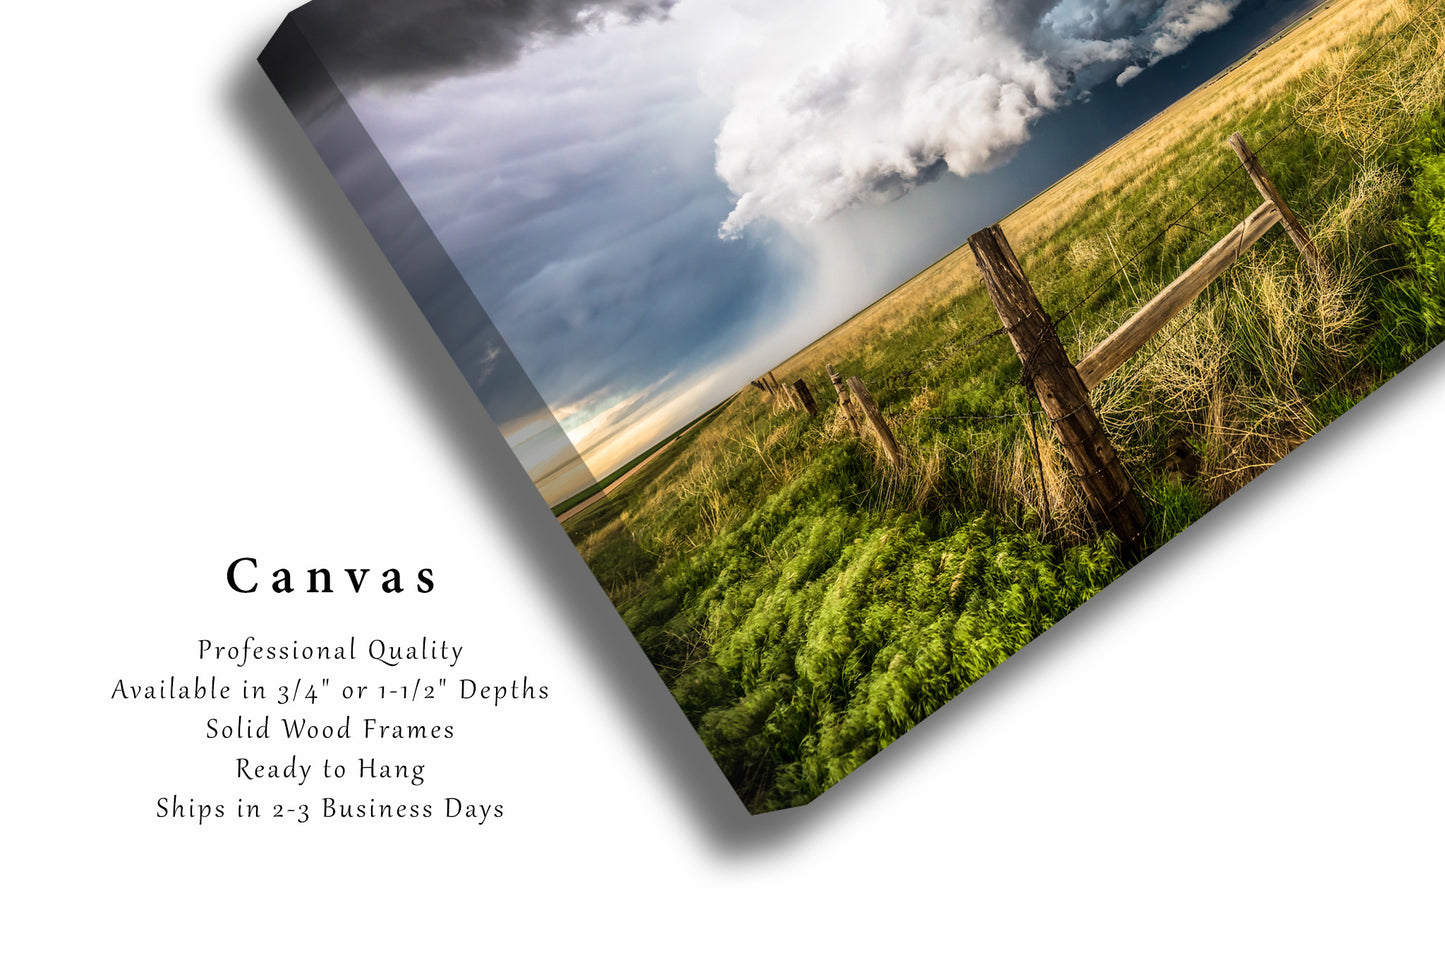 Landscape Canvas Wall Art - Gallery Wrap of Thunderstorm Over Prairie on Spring Day in Colorado - Ready to Hang Weather Photo Artwork Decor